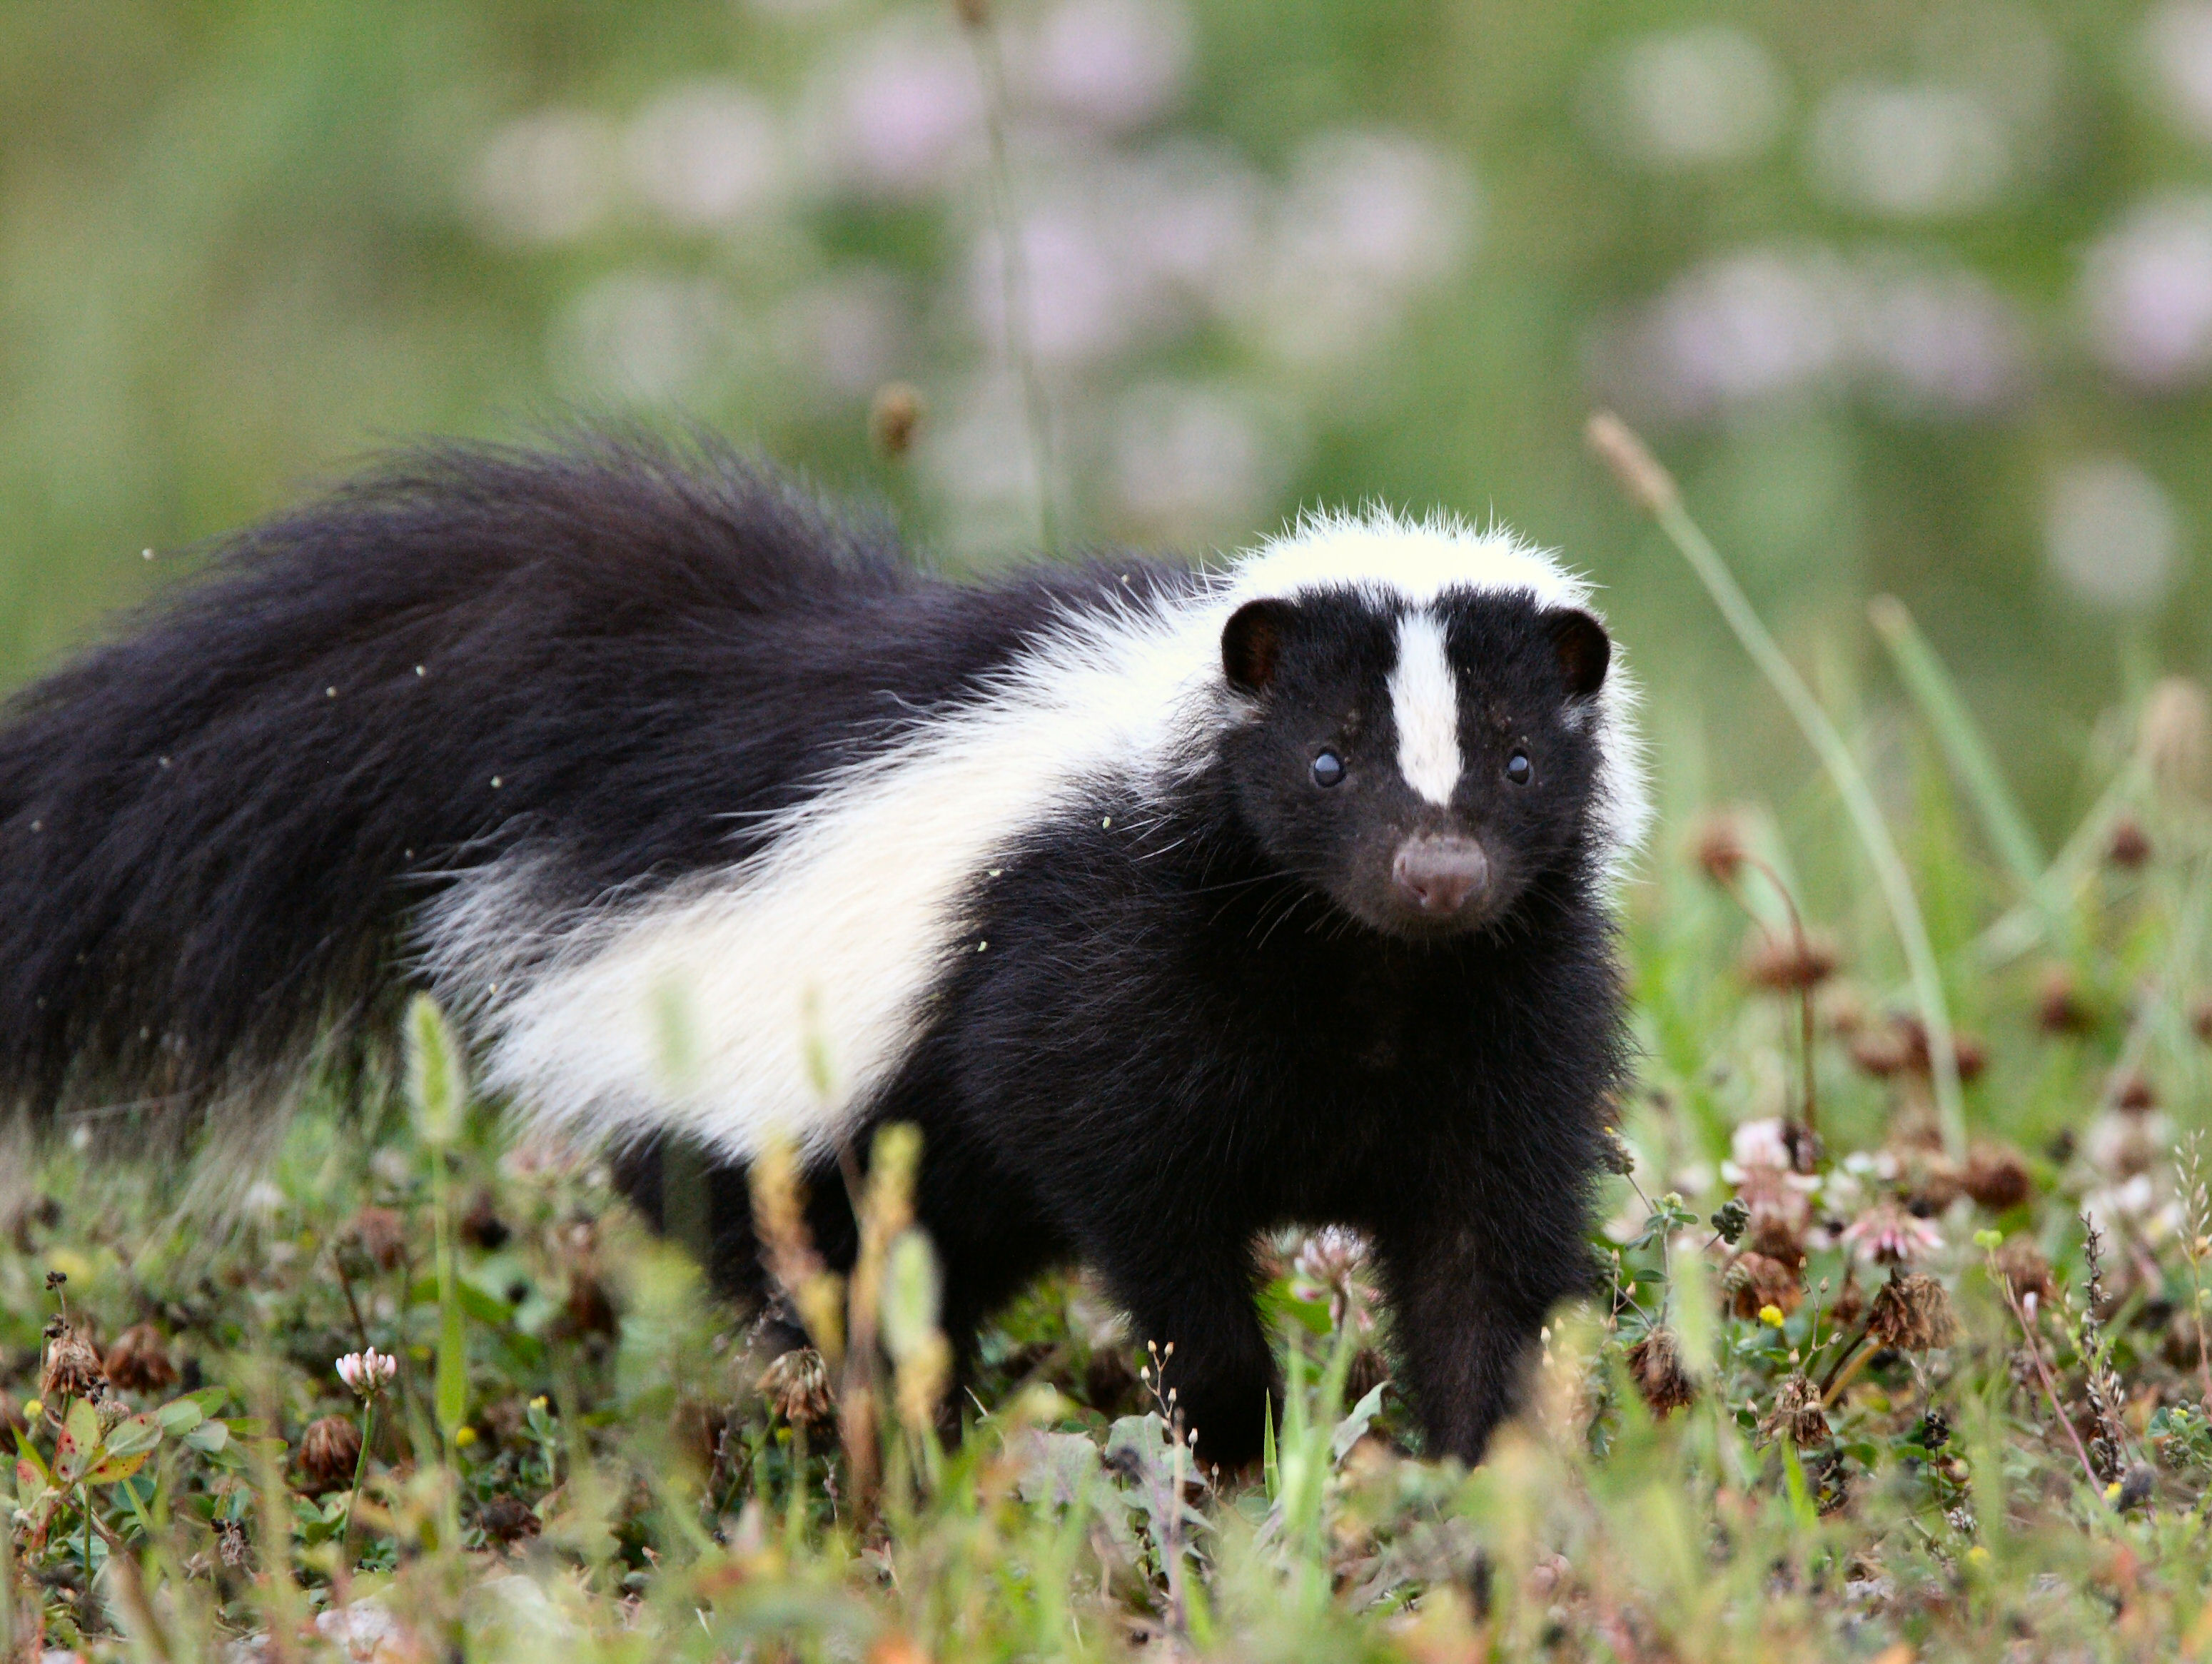 How to deal with problem Skunk in Virginia | WildlifeHelp.org